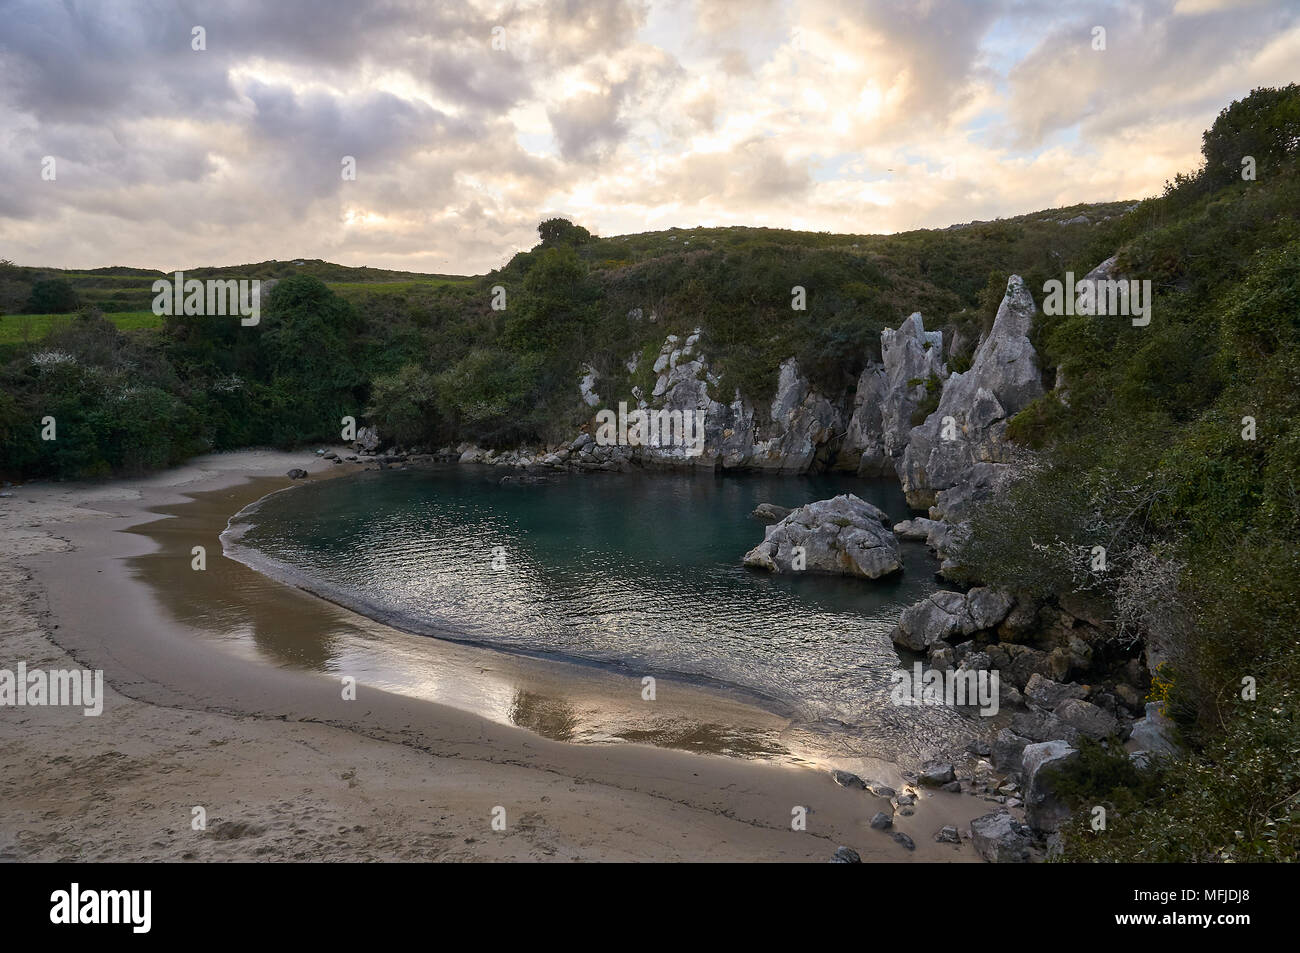 Sunset at Gulpiyuri beach, which is an inland beach arose in flooded sinkhole created by karst erosion (Cantabrian sea, Naves, Llanes, Asturias,Spain) Stock Photo